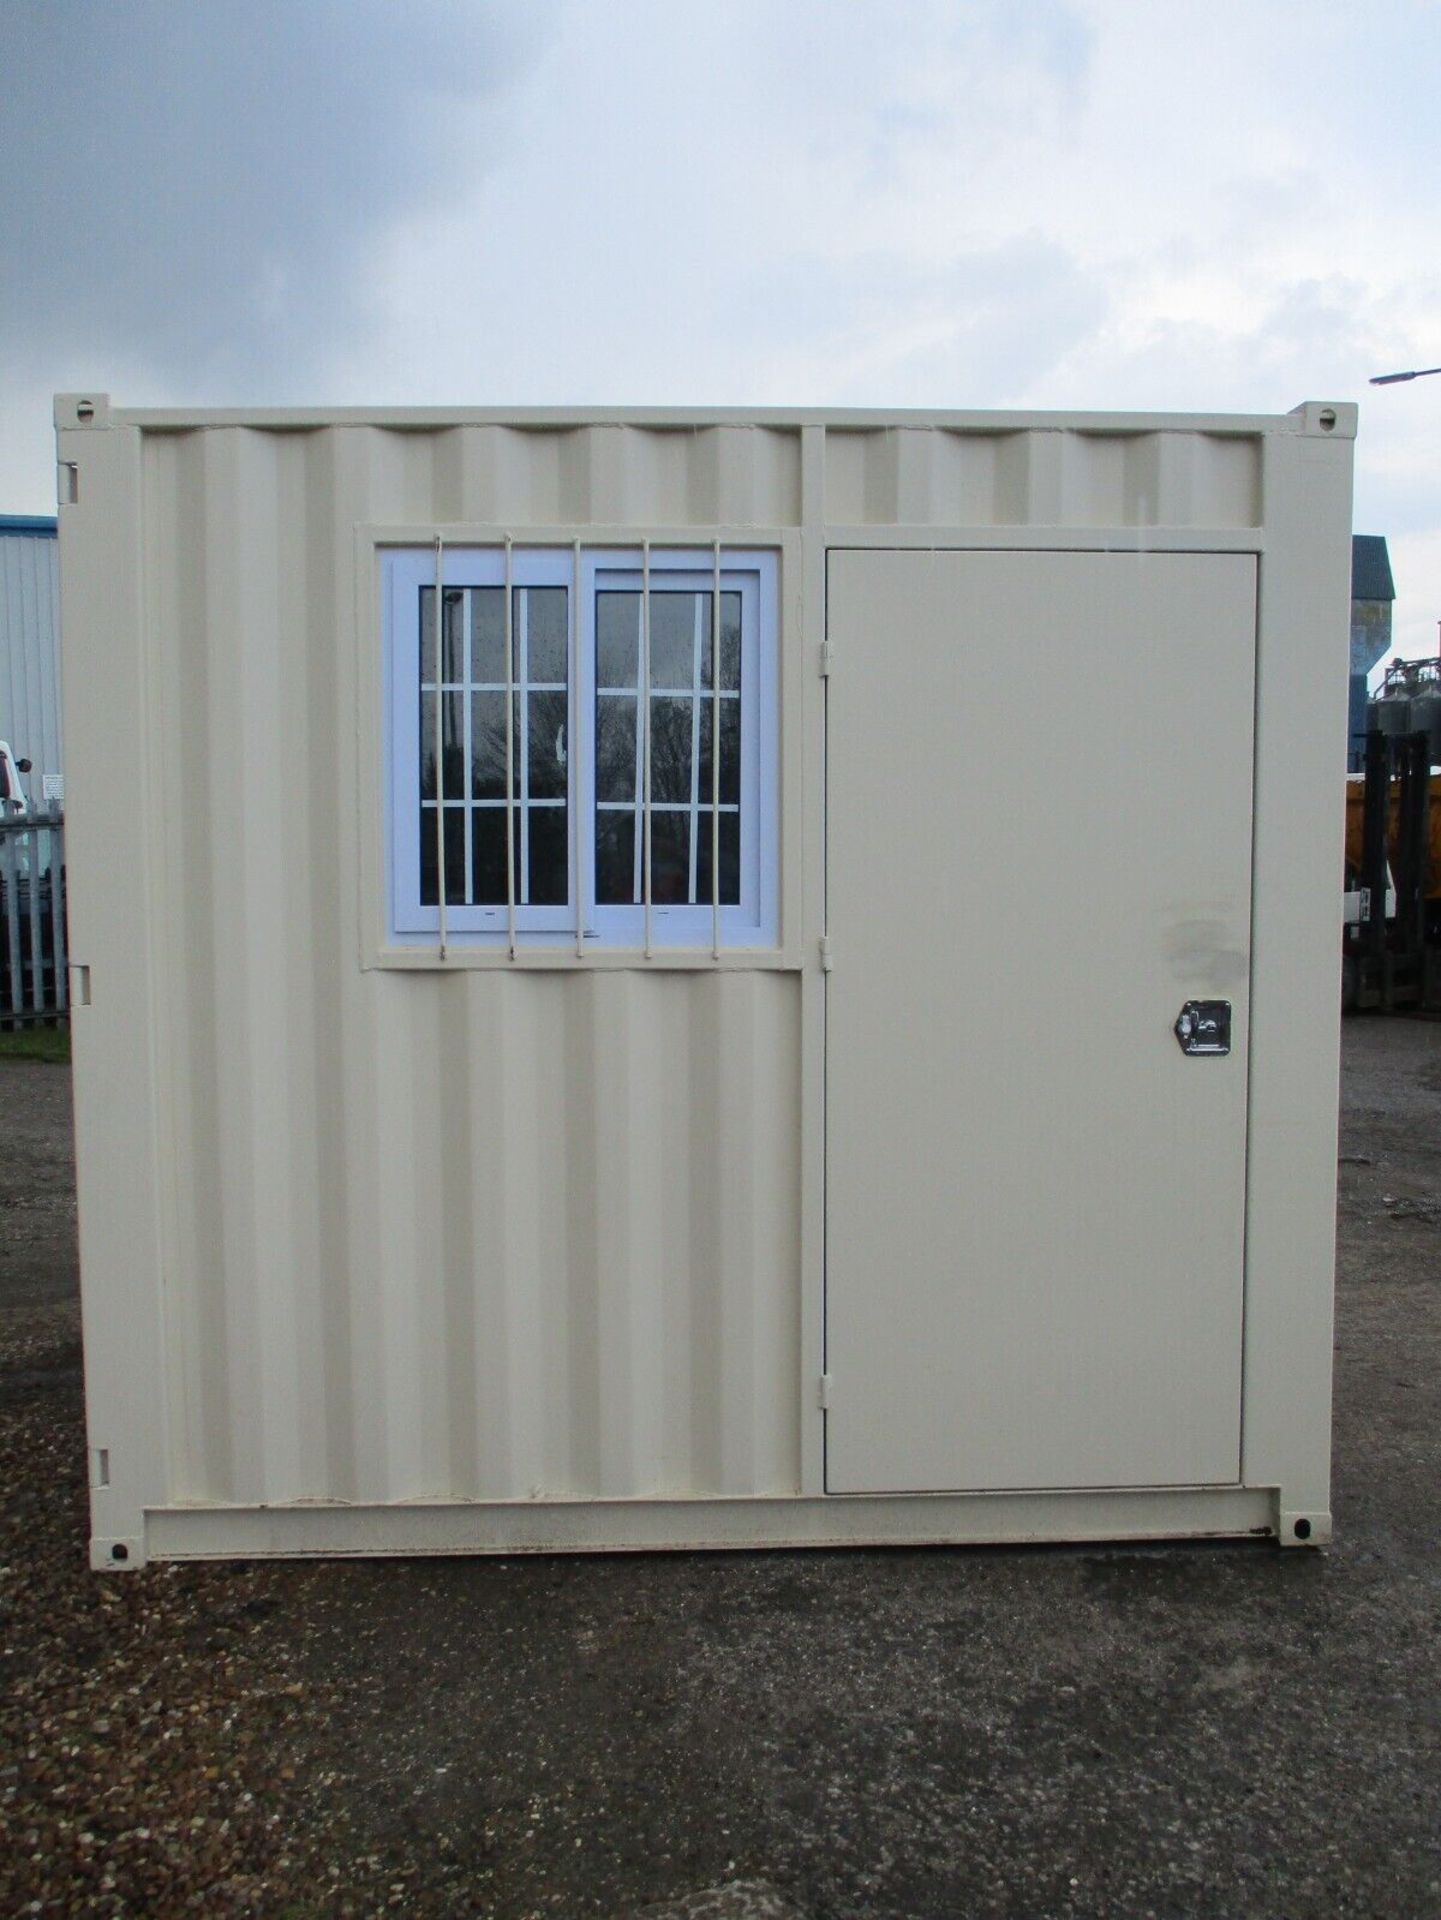 NEW 9 FOOT SECURE SHIPPING CONTAINER 10 HOME OFFICE GARDEN ROOM GARAGE SHED